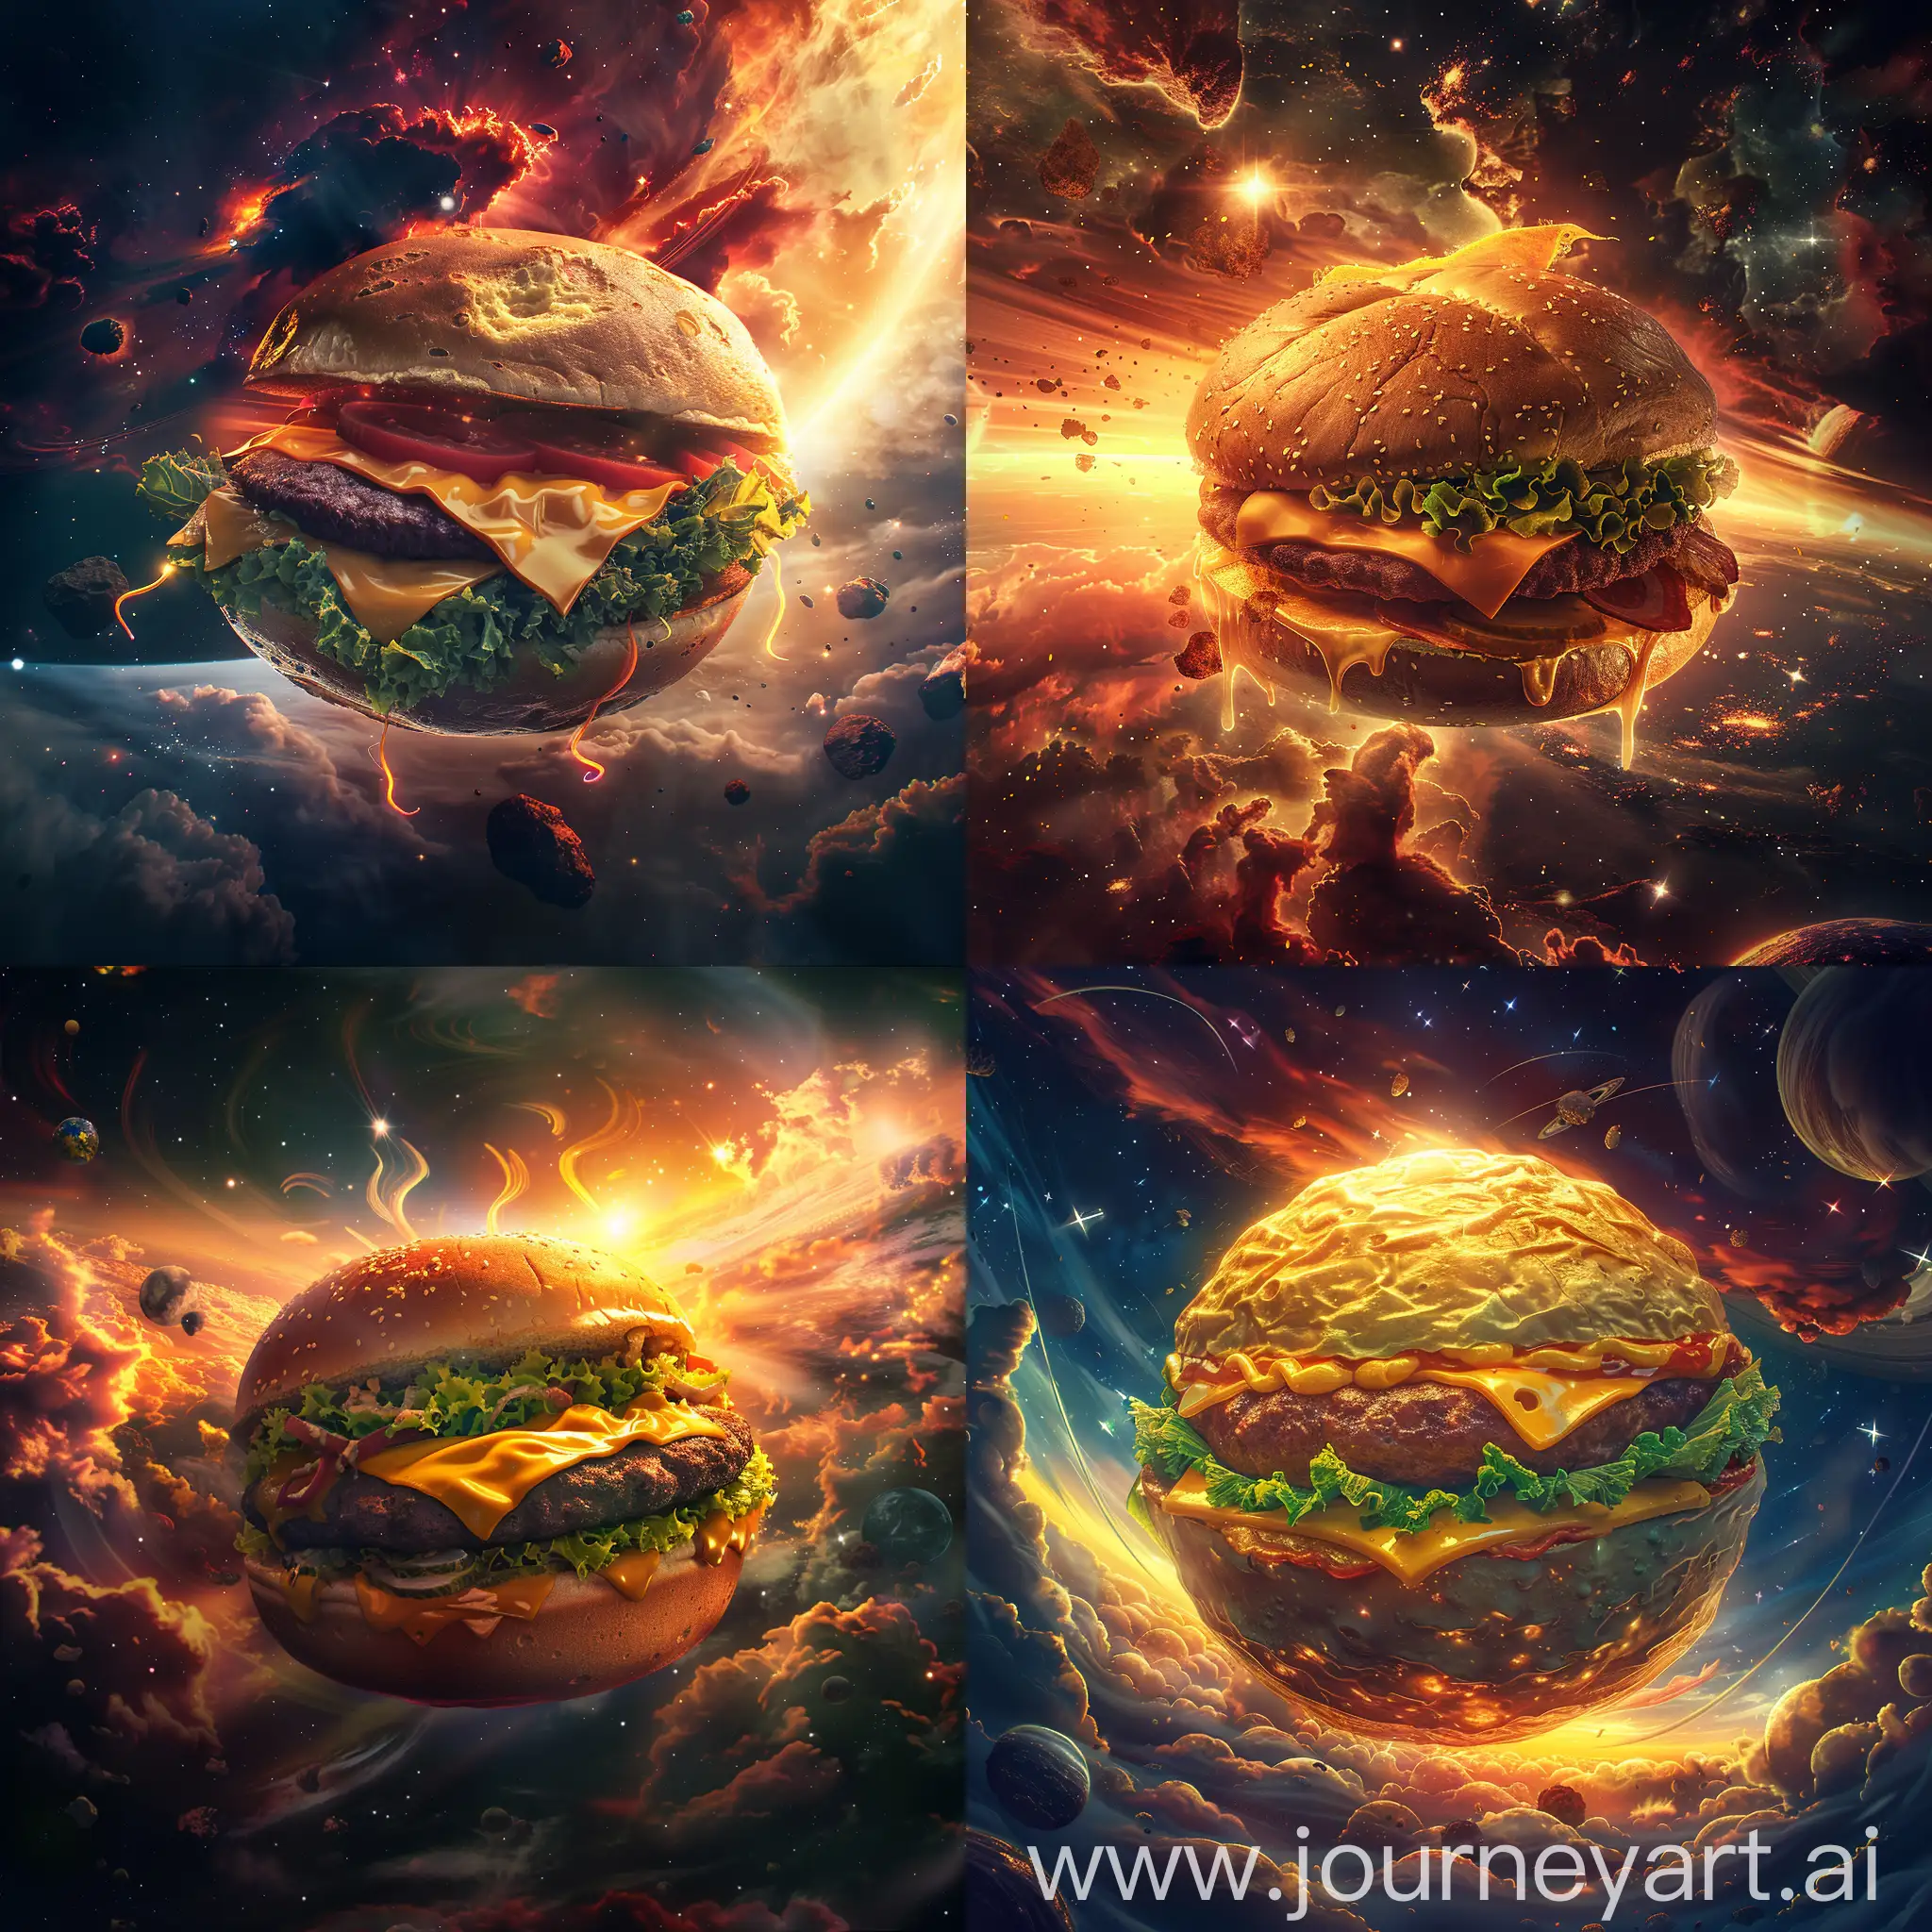 A giant cheeseburger-shaped planet floating in space, realistic, highly detailed, 8k, photorealistic, dramatic lighting, cinematic atmosphere, beautiful sunset colors, breathtaking cosmic scenery, intricate textures, glowing buns, melted cheese, crisp lettuce, juicy patty, detailed craters, swirling clouds, glowing stars, nebulae, dramatic shadows, volumetric lighting